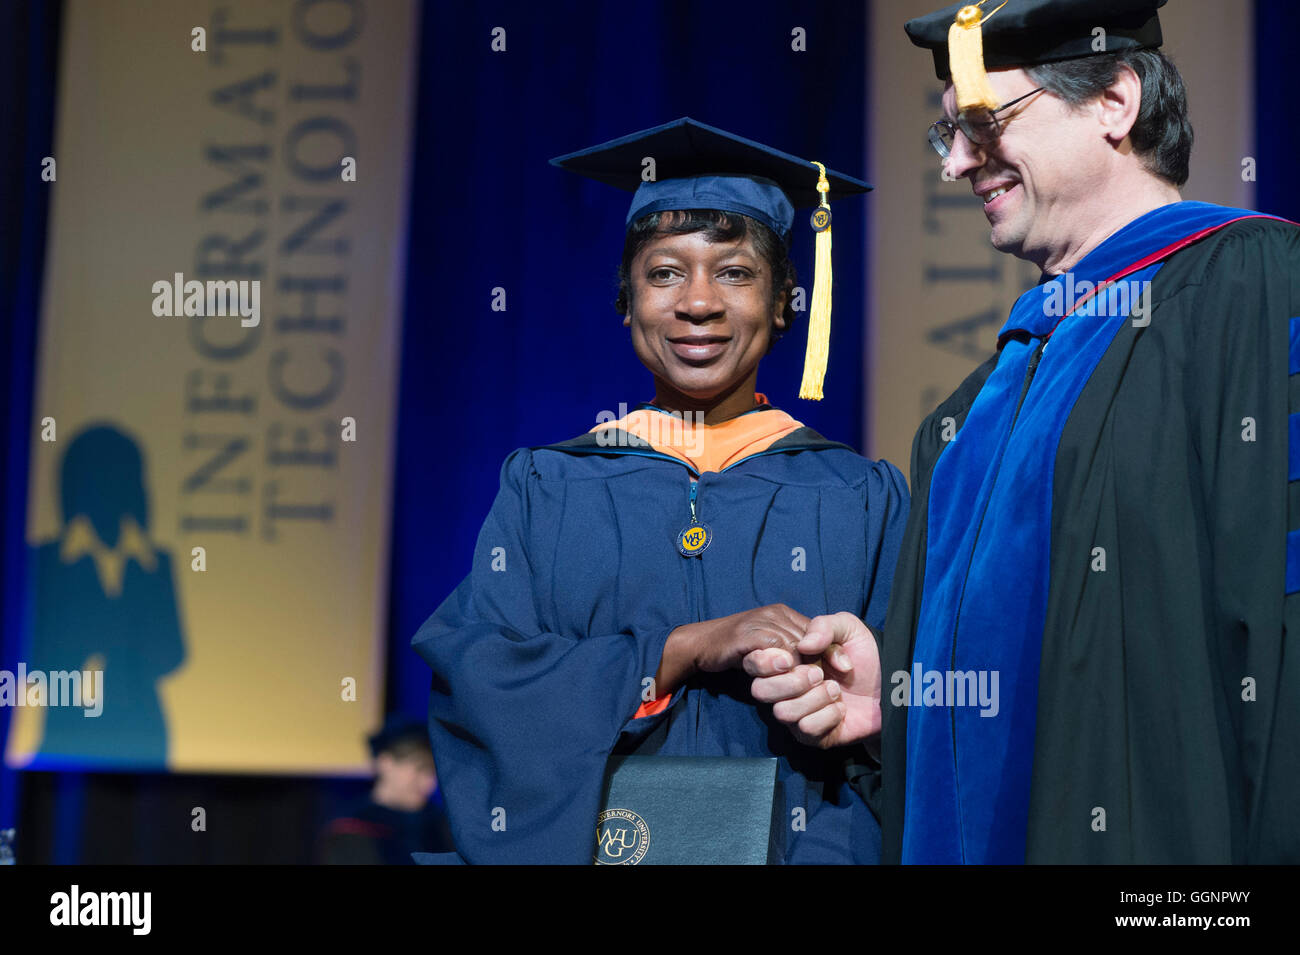 Graduation candidate in cap and gown receives diploma at Western Governors University commencement ceremony in Orlando, FL Stock Photo